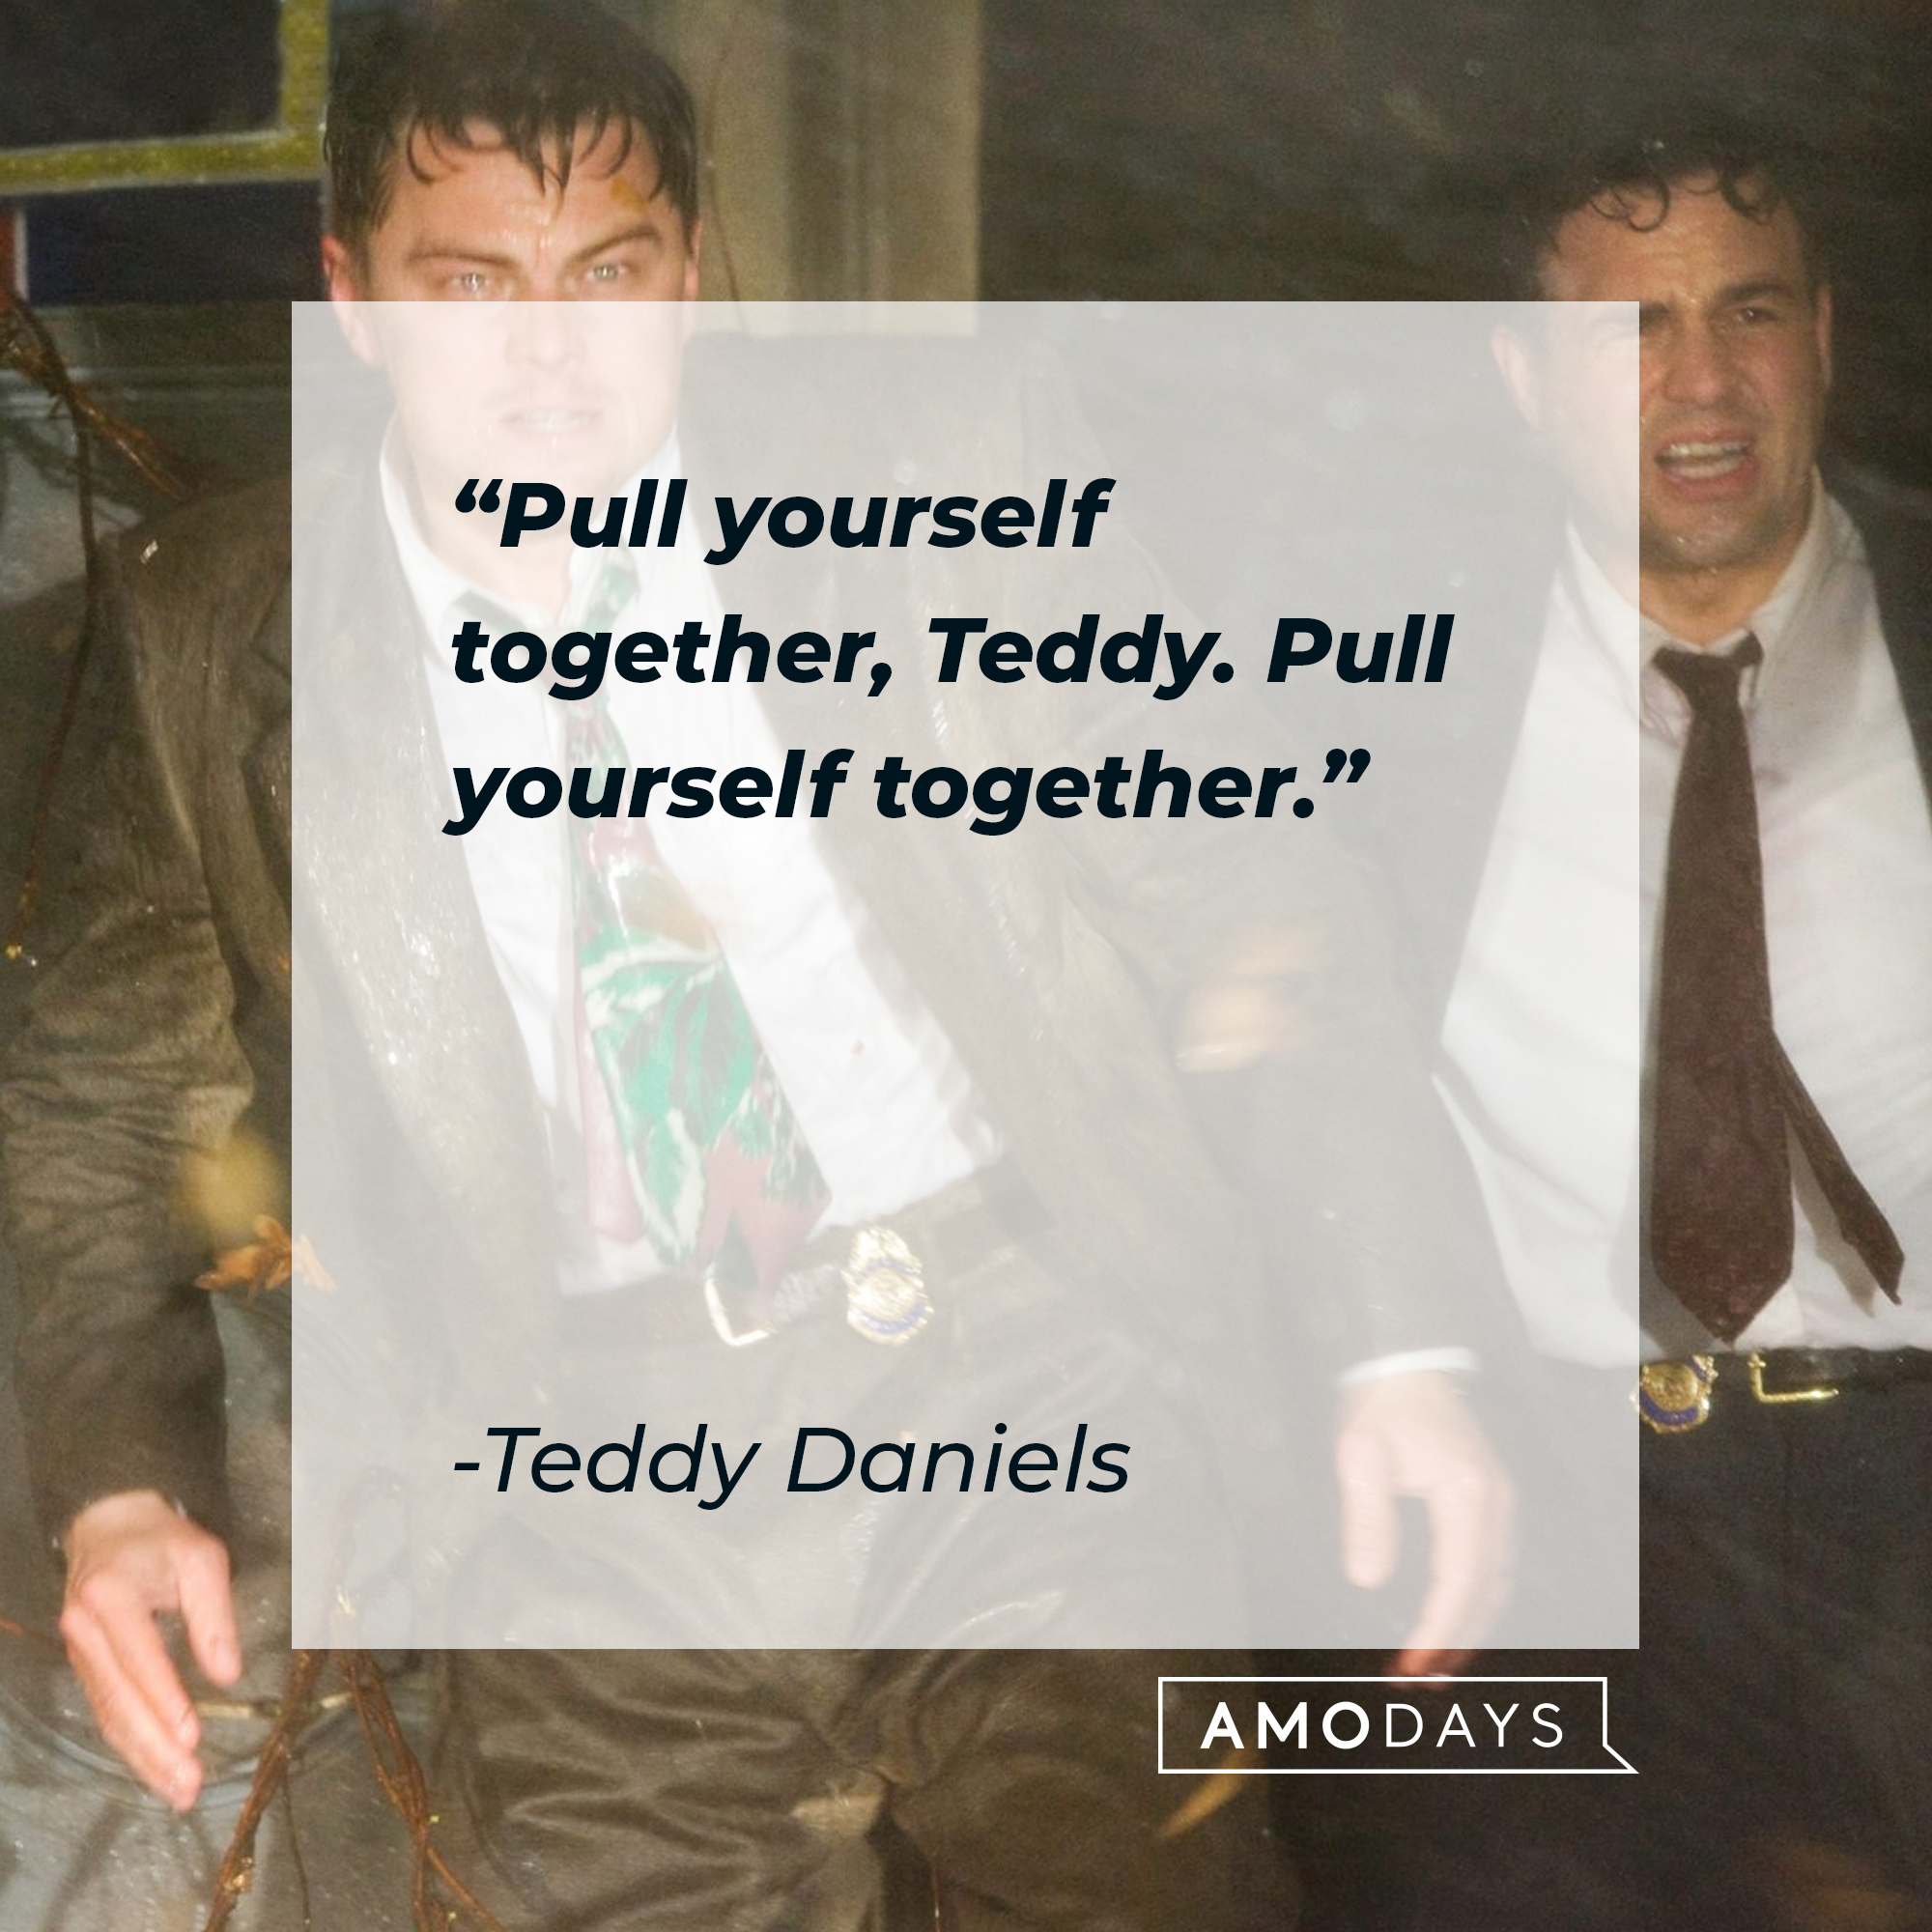 "Pull yourself together, Teddy. Pull yourself together." | Source: facebook.com/ShutterIsland